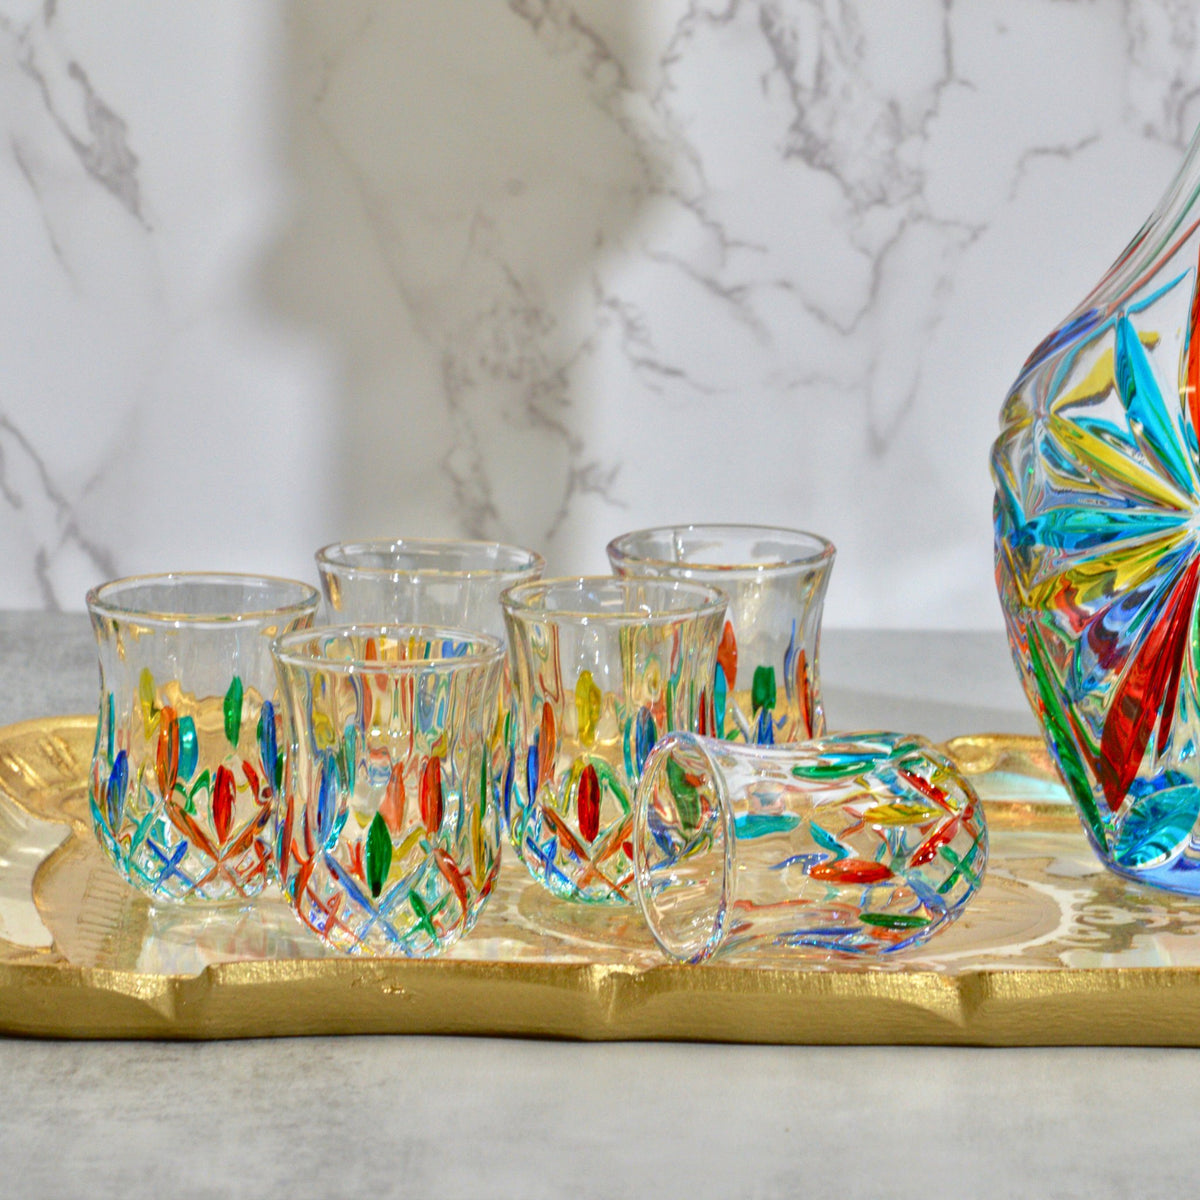 Opera Shot Glasses, Set of 6, Hand Painted Crystal, Made in Italy - My Italian Decor